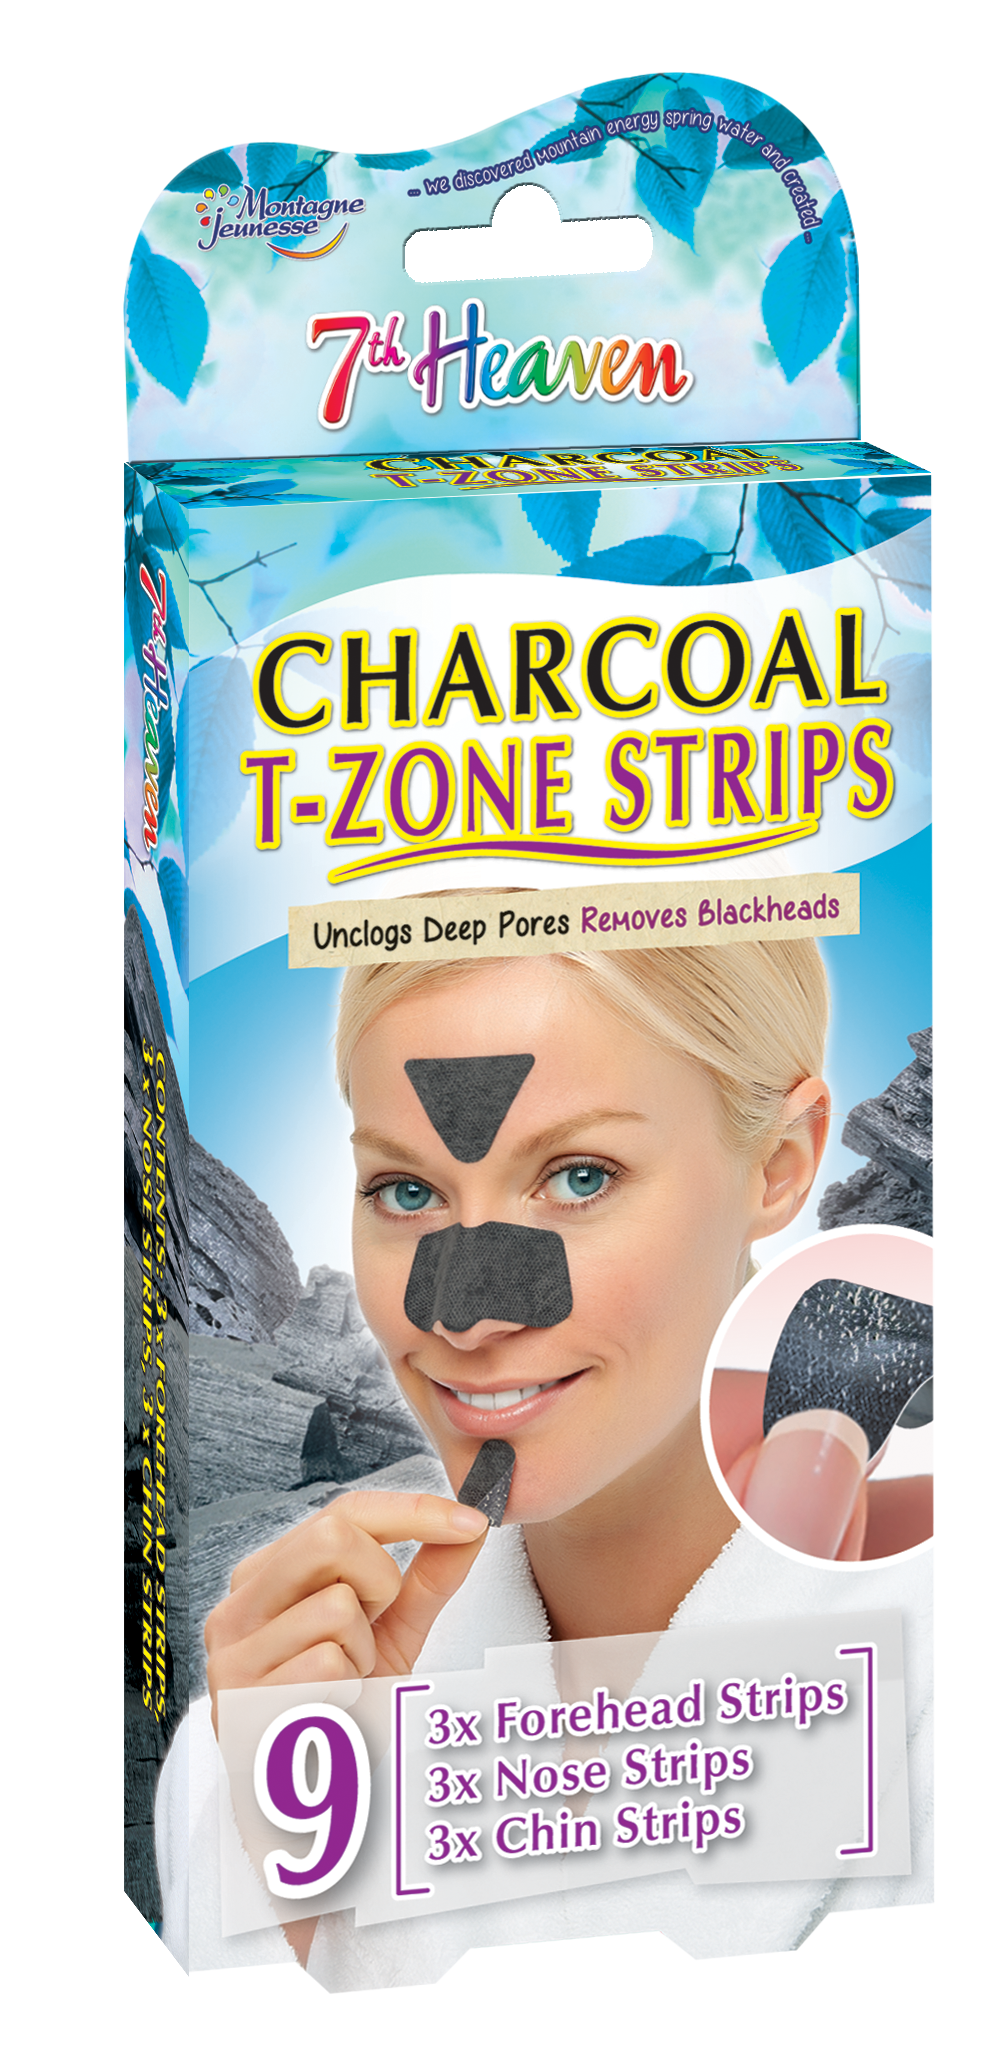  7th Heaven Blackhead Pull-Out T-Zone Strips with Activated Charcoal, Squeezed Aloe Vera and Crushed Witch Hazel for Ultra Clear Pores (Contains Forehead, Nose and Chin Strips)